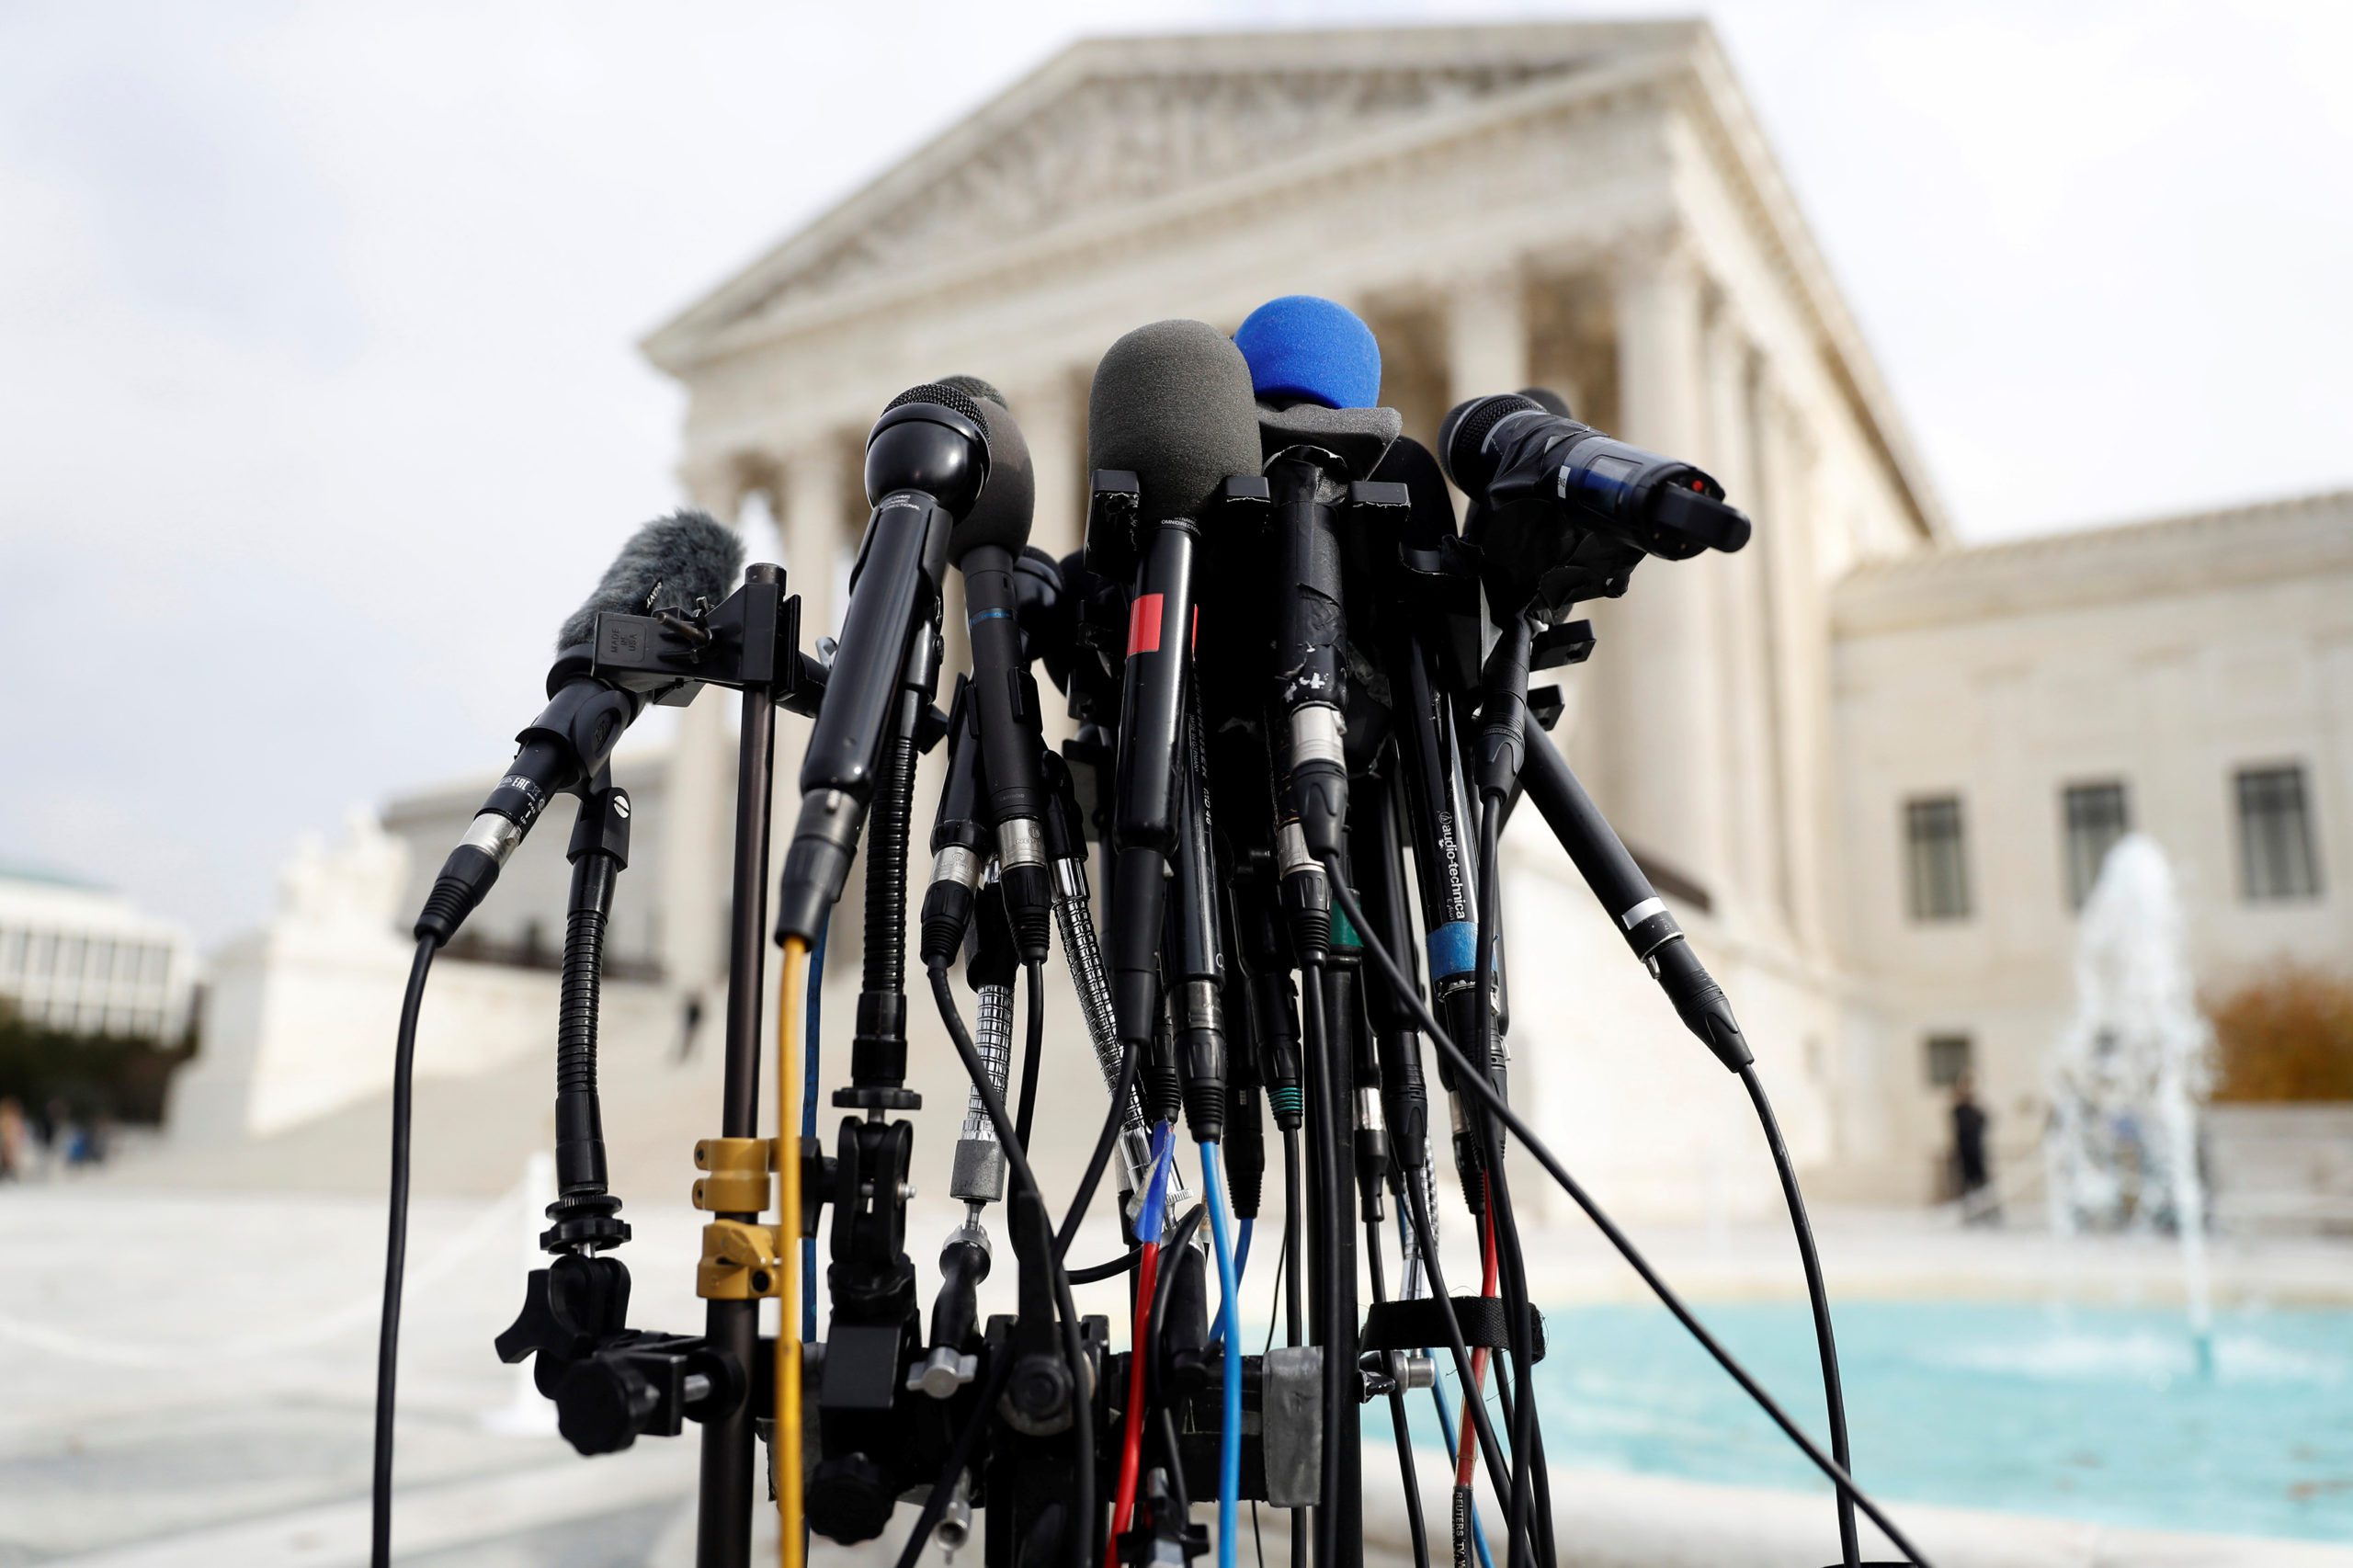 Microphones are assembled during oral arguments in the Masterpiece Cakeshop vs. Colorado Civil Rights Commission case at the Supreme Court in Washington, U.S., December 5, 2017. REUTERS/Aaron P. Bernstein - RC18E46EA940